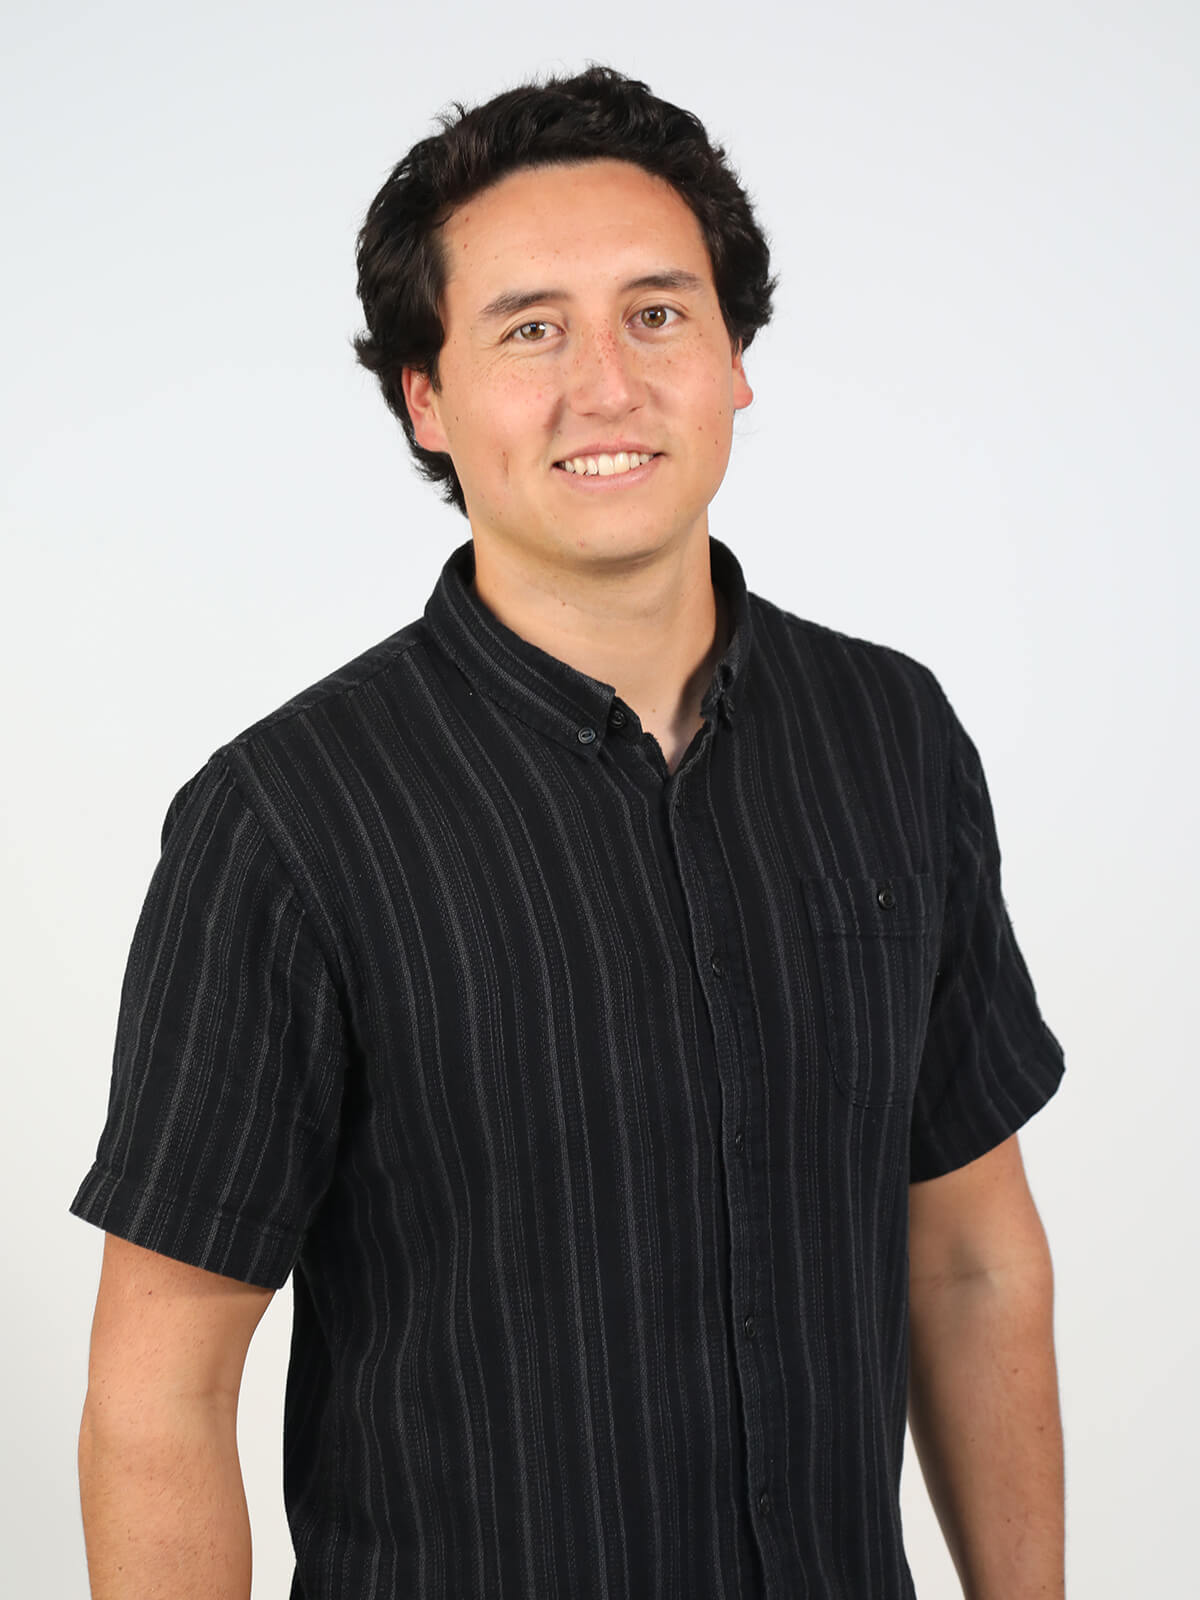 Nick Brown Associate Engineer at Commercial Development Resources in Costa Mesa, CA